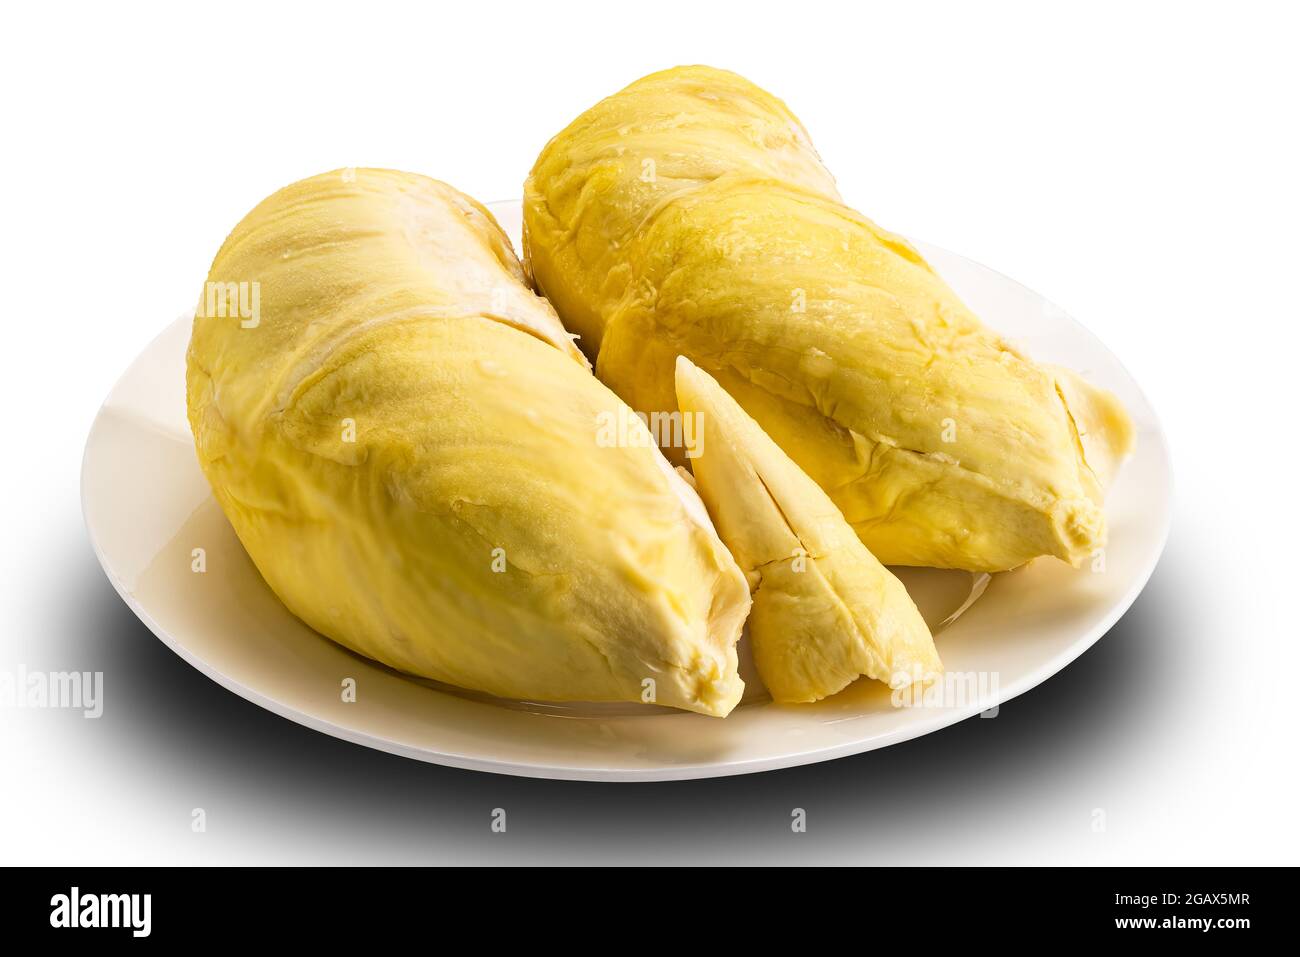 Ripe durian in white ceramic plate on white background with clipping path. Stock Photo